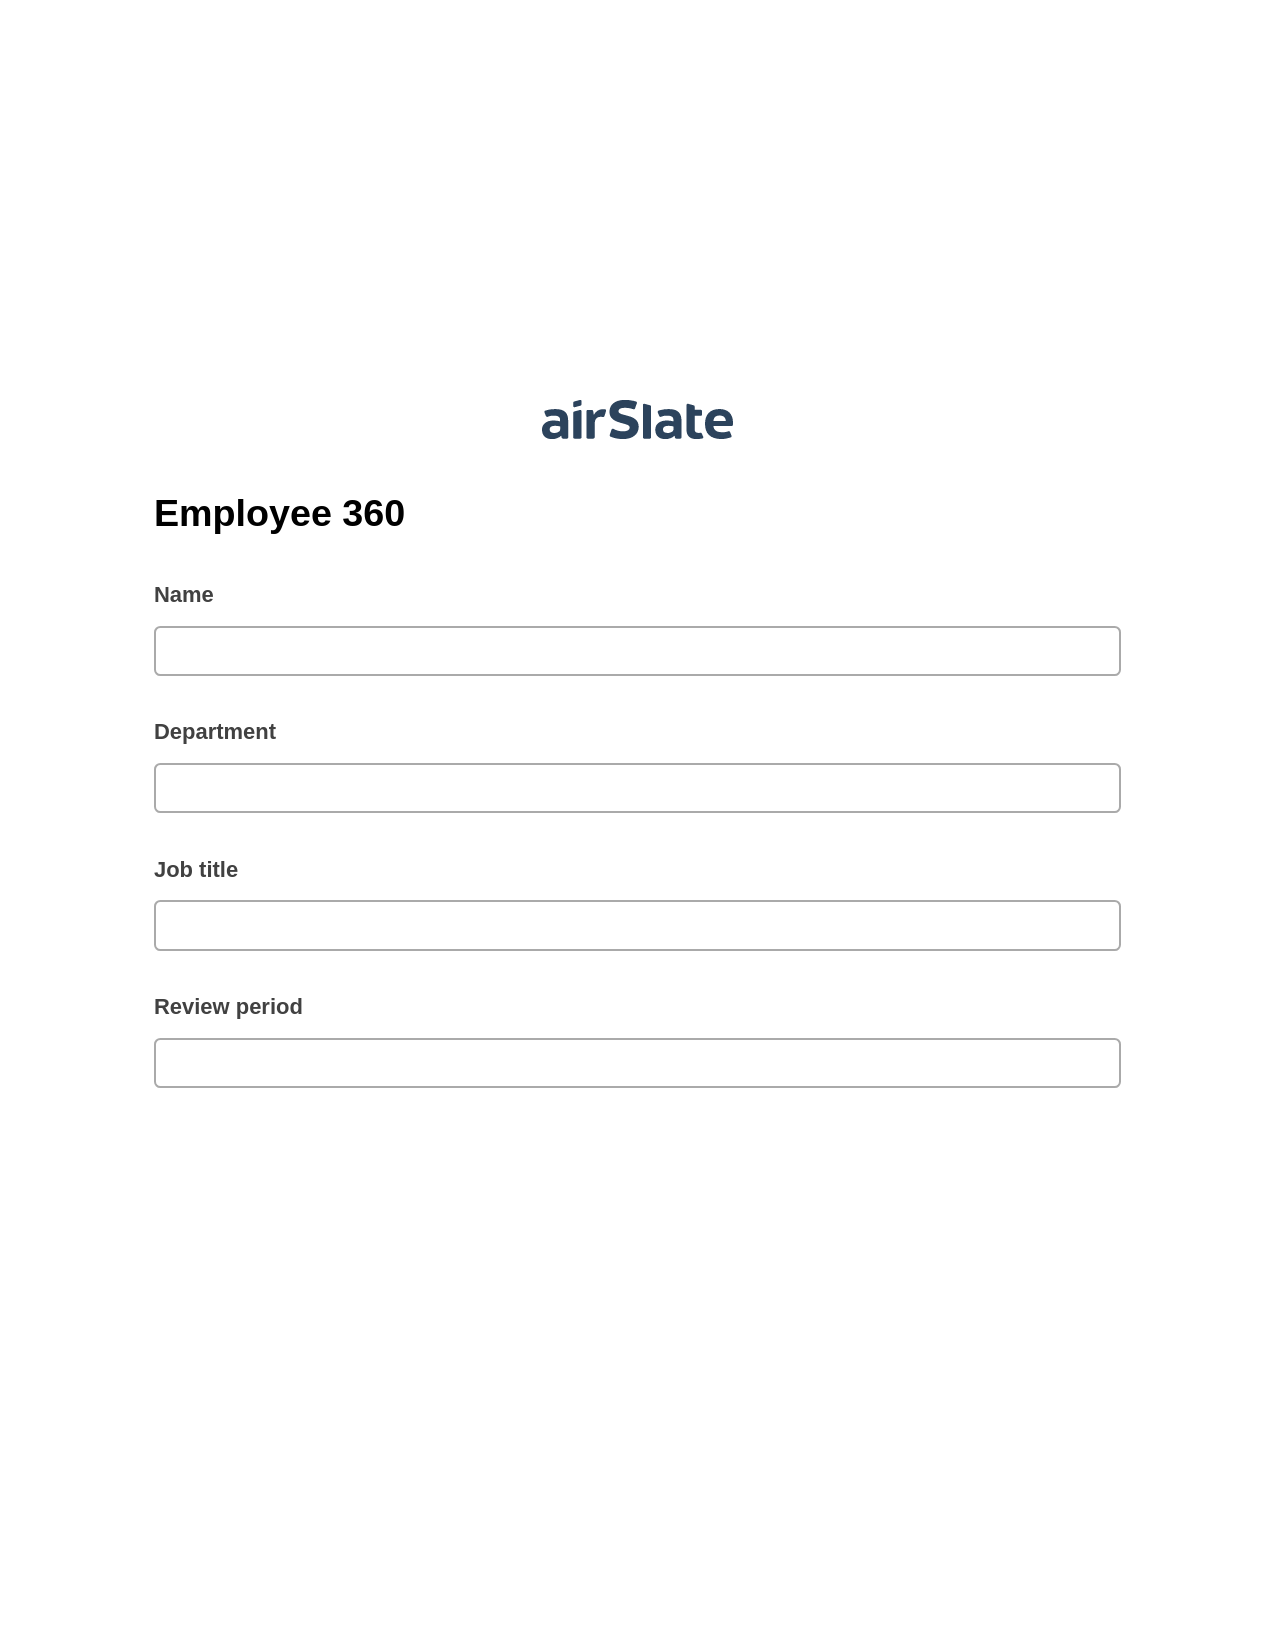 Employee 360 Prefill from NetSuite records, Send a Slate to MS Dynamics 365 Contact Bot, Export to Salesforce Record Bot